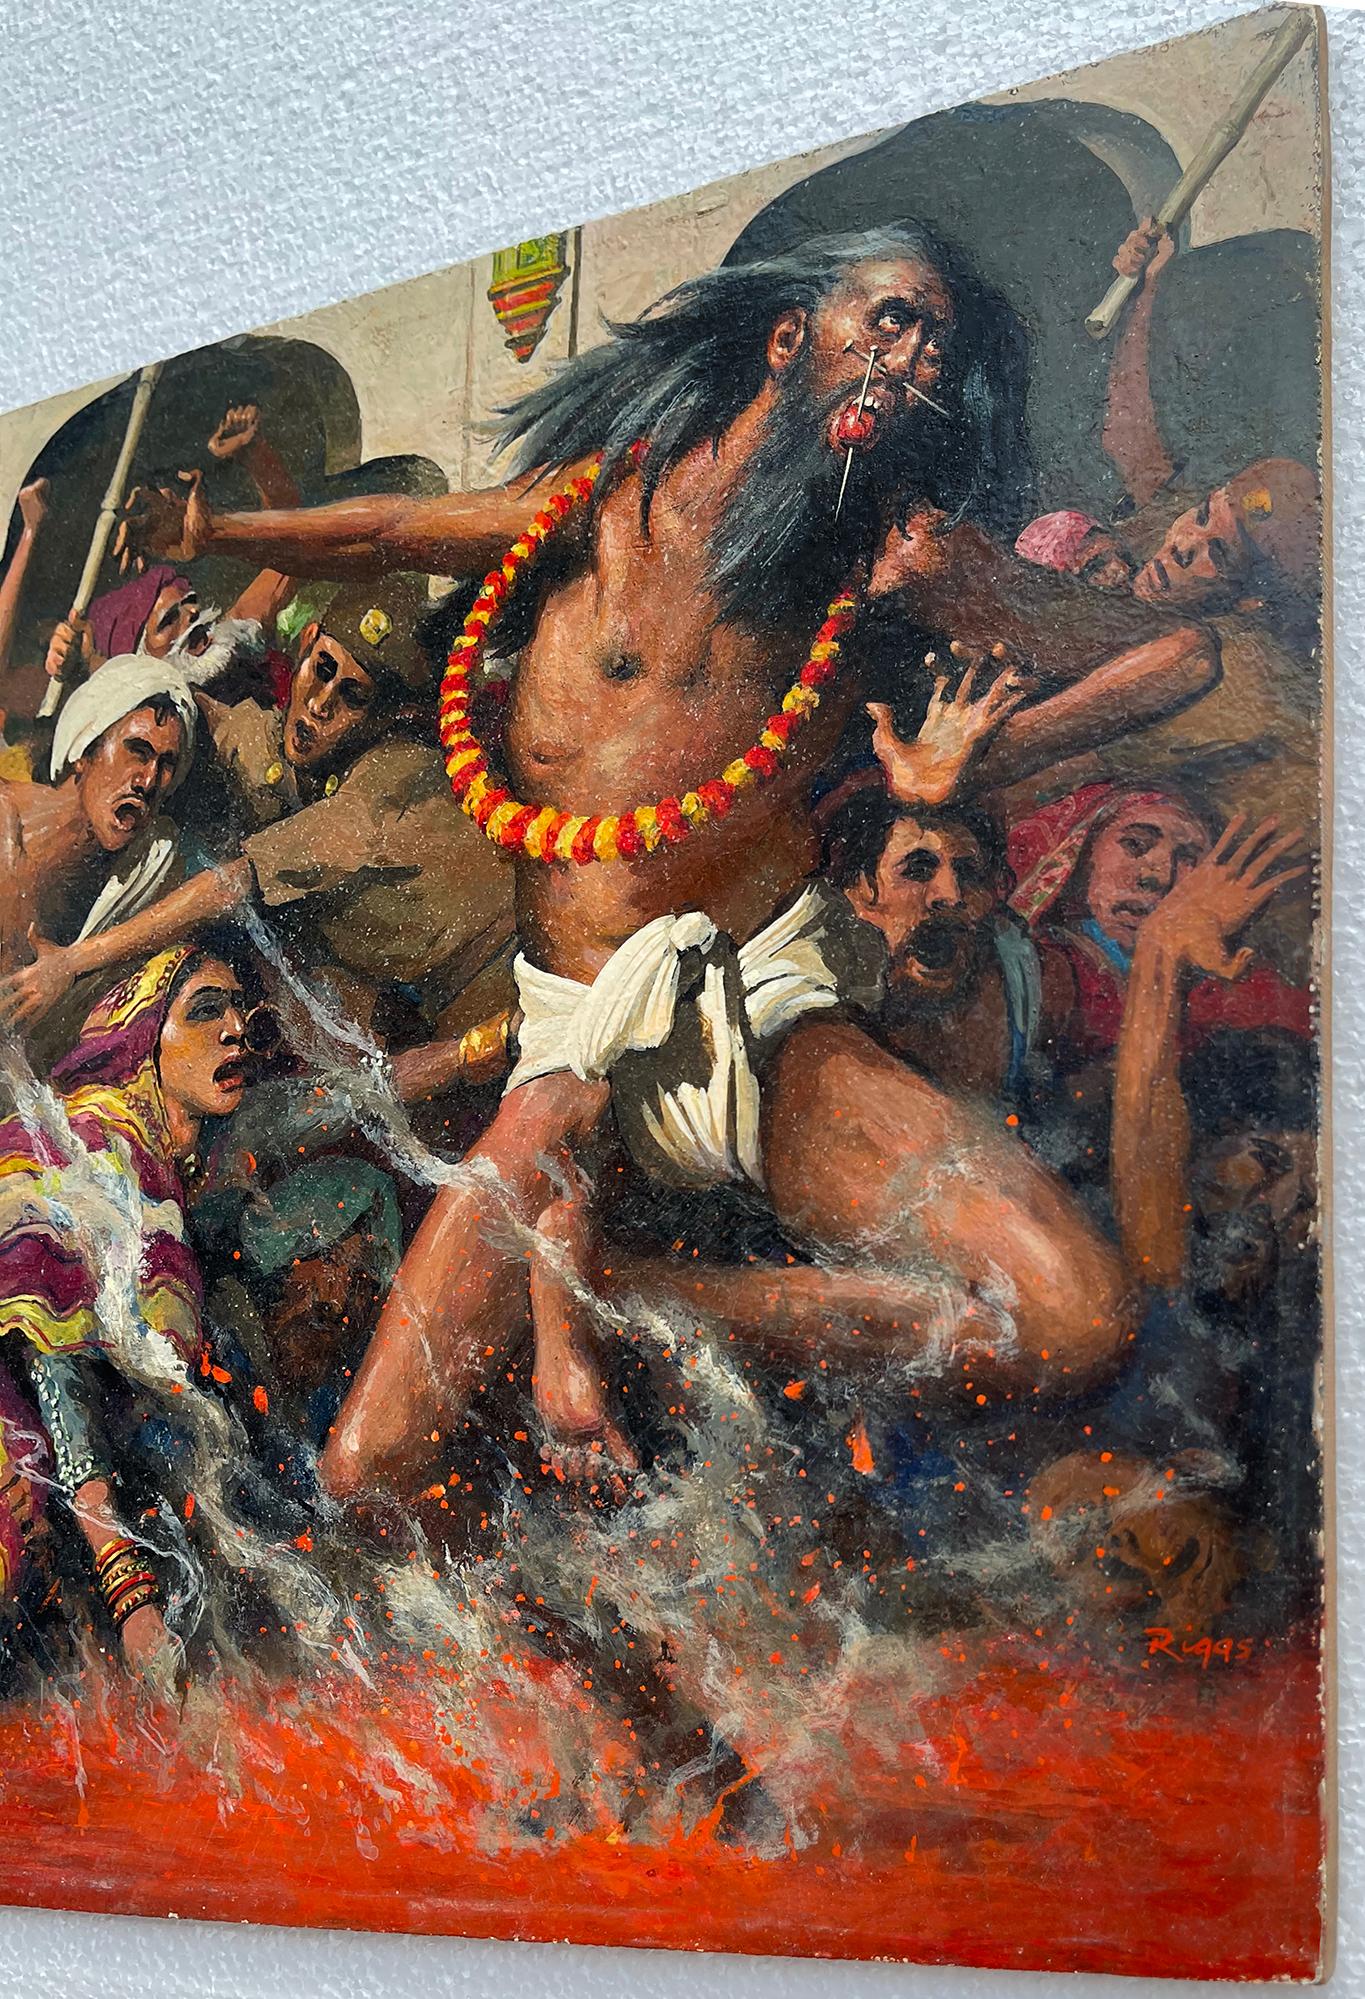 Indian Ritual  Walking on Fire,  Firewalking Ceremony,  Mythology and Religion - Painting by Robert Riggs